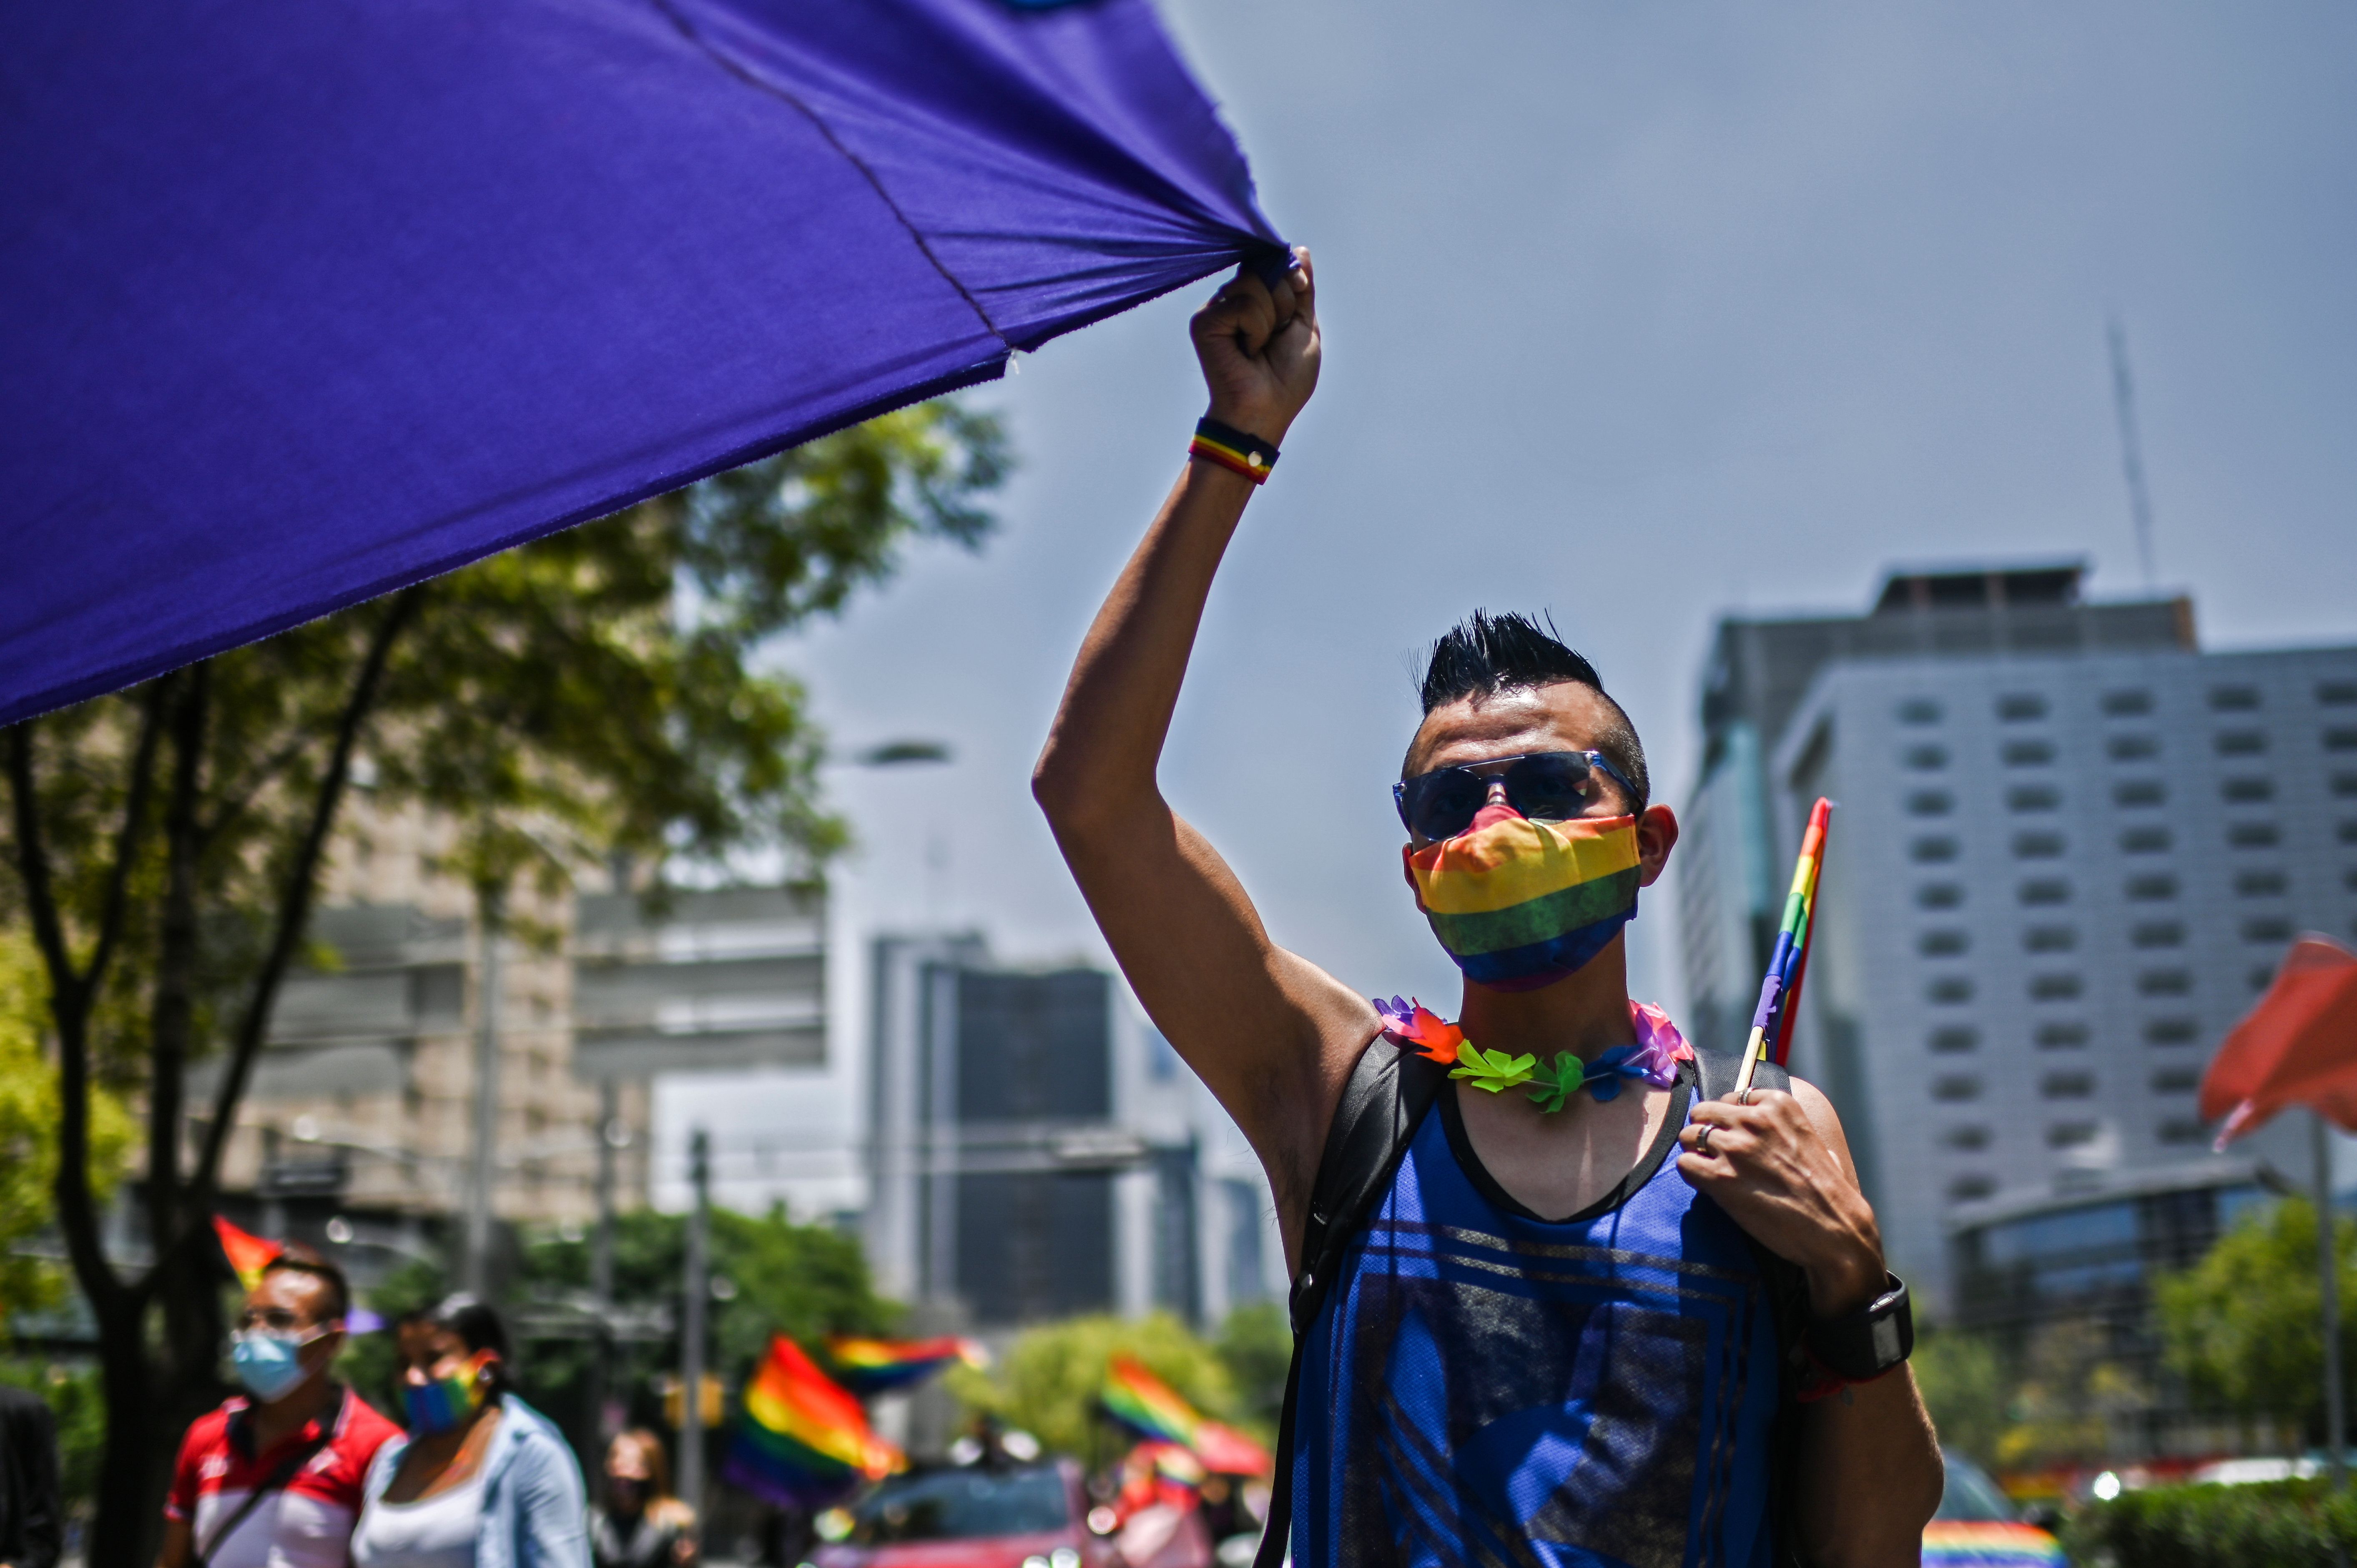 A reveler takes part in the celebration of gay pride in Mexico City, on June 27, 2020.